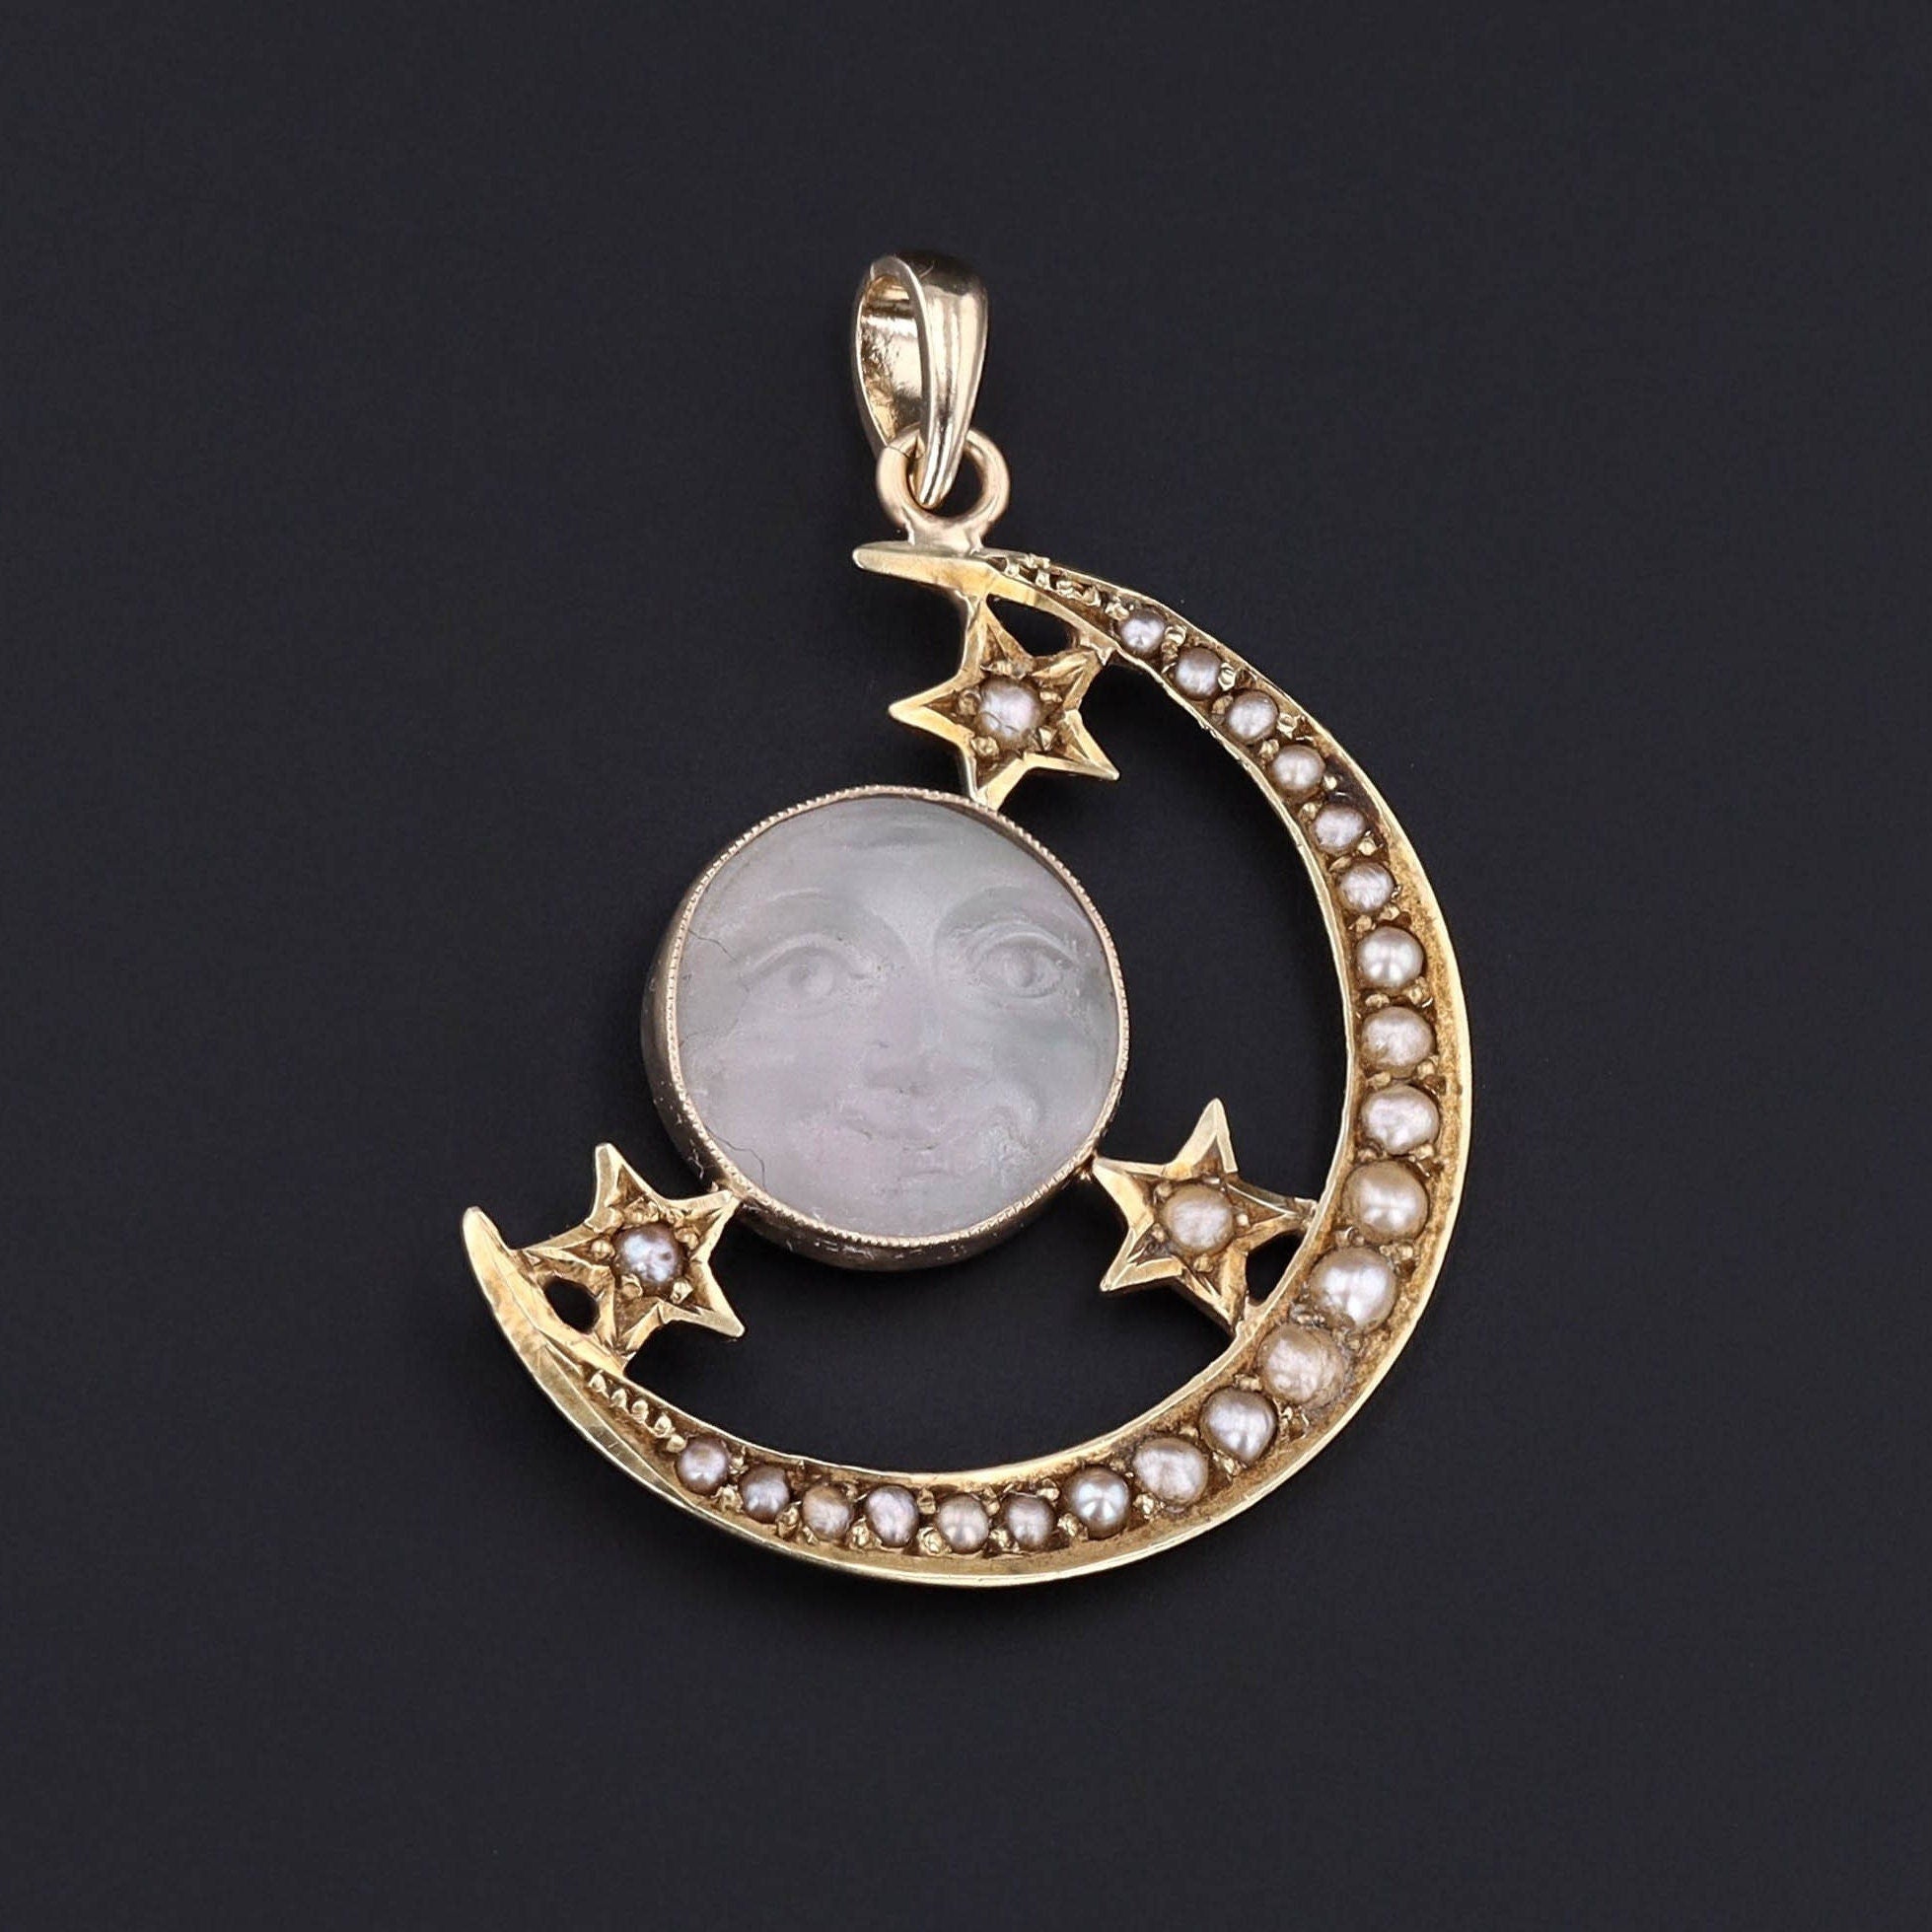 Man in the Moon Pendant | Carved Glass Moon Pendant with Pearls 